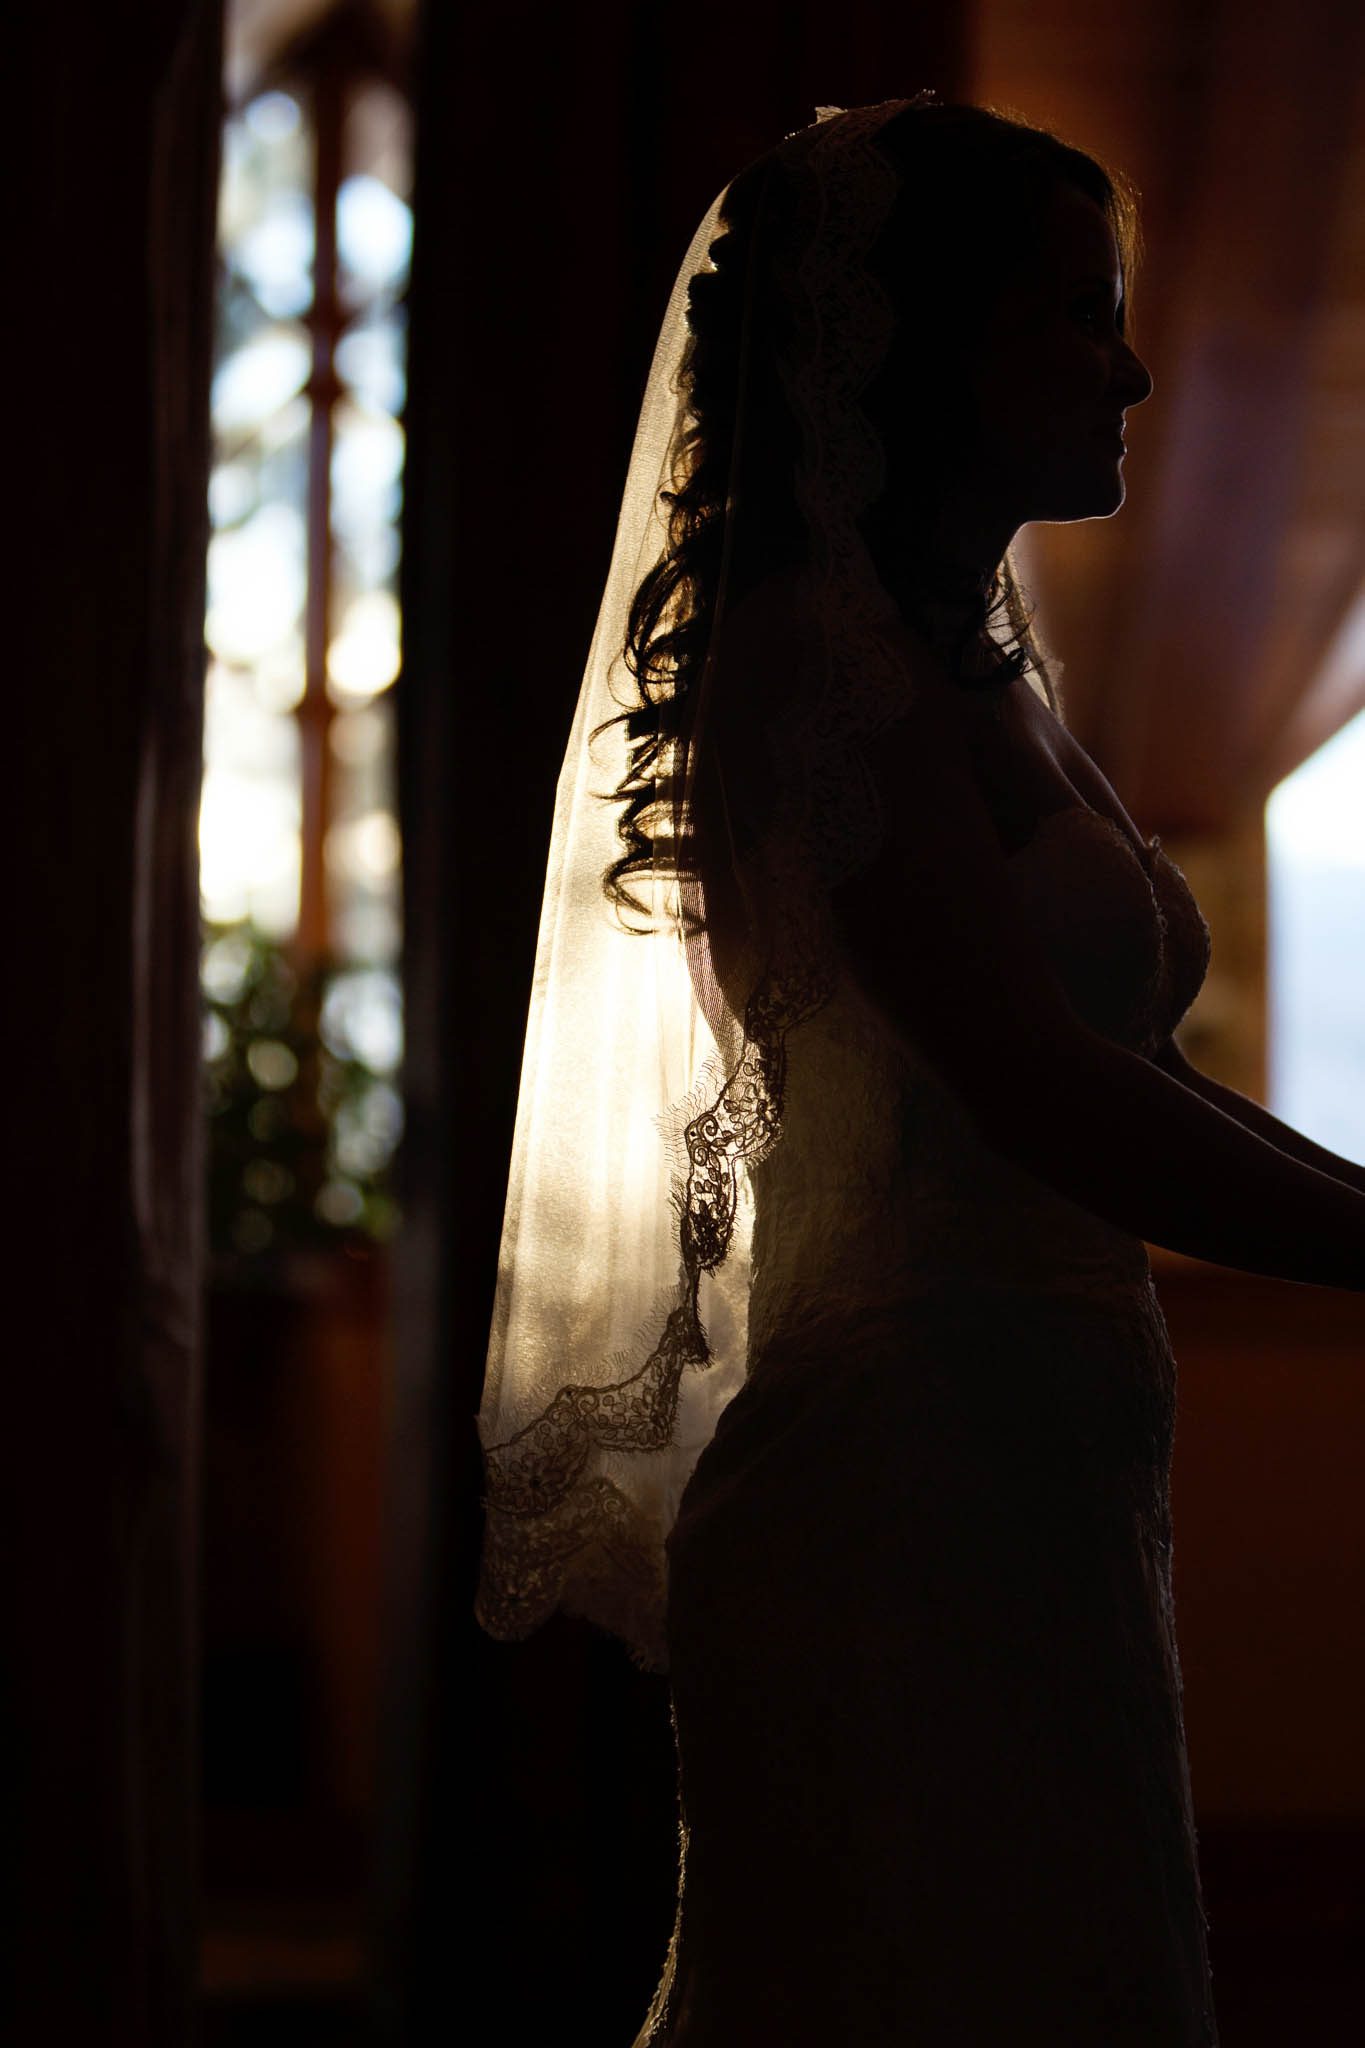 light shining through bride's veil during ceremony, silhouette, lace, Edgewood lobby